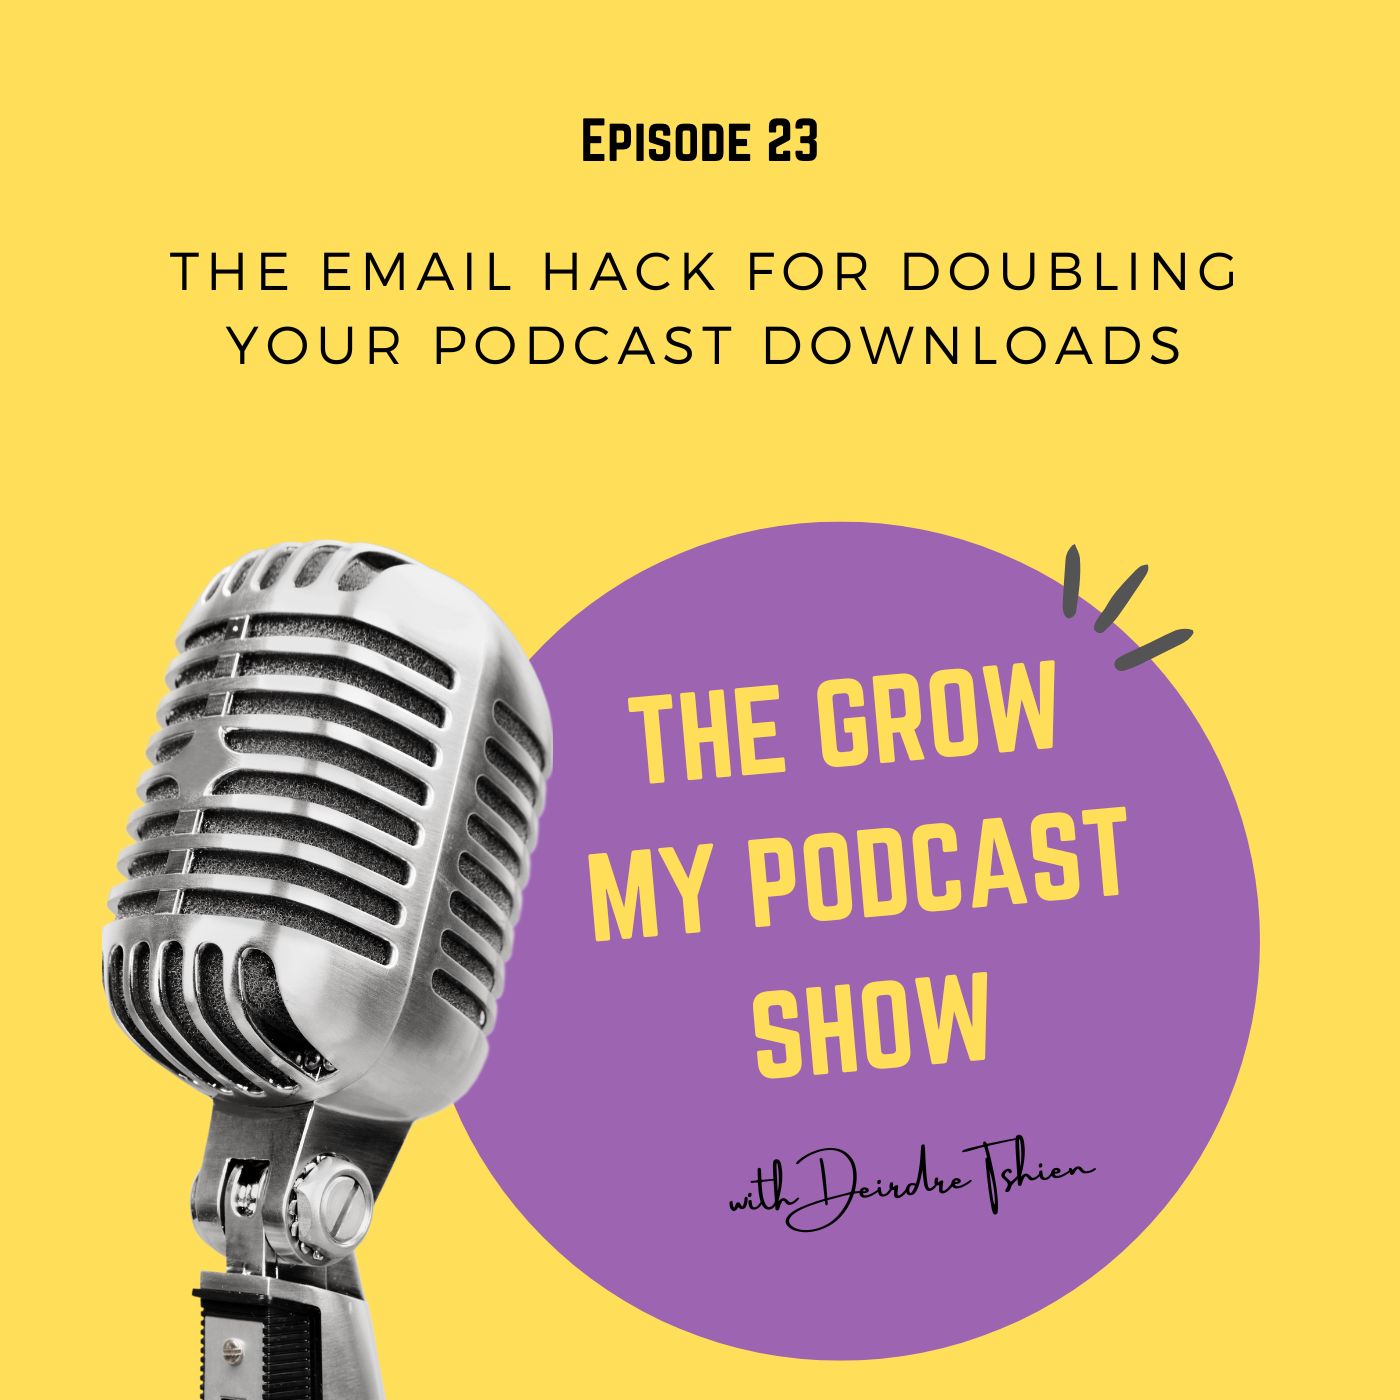 The Email Hack for Doubling Your Podcast Downloads Image